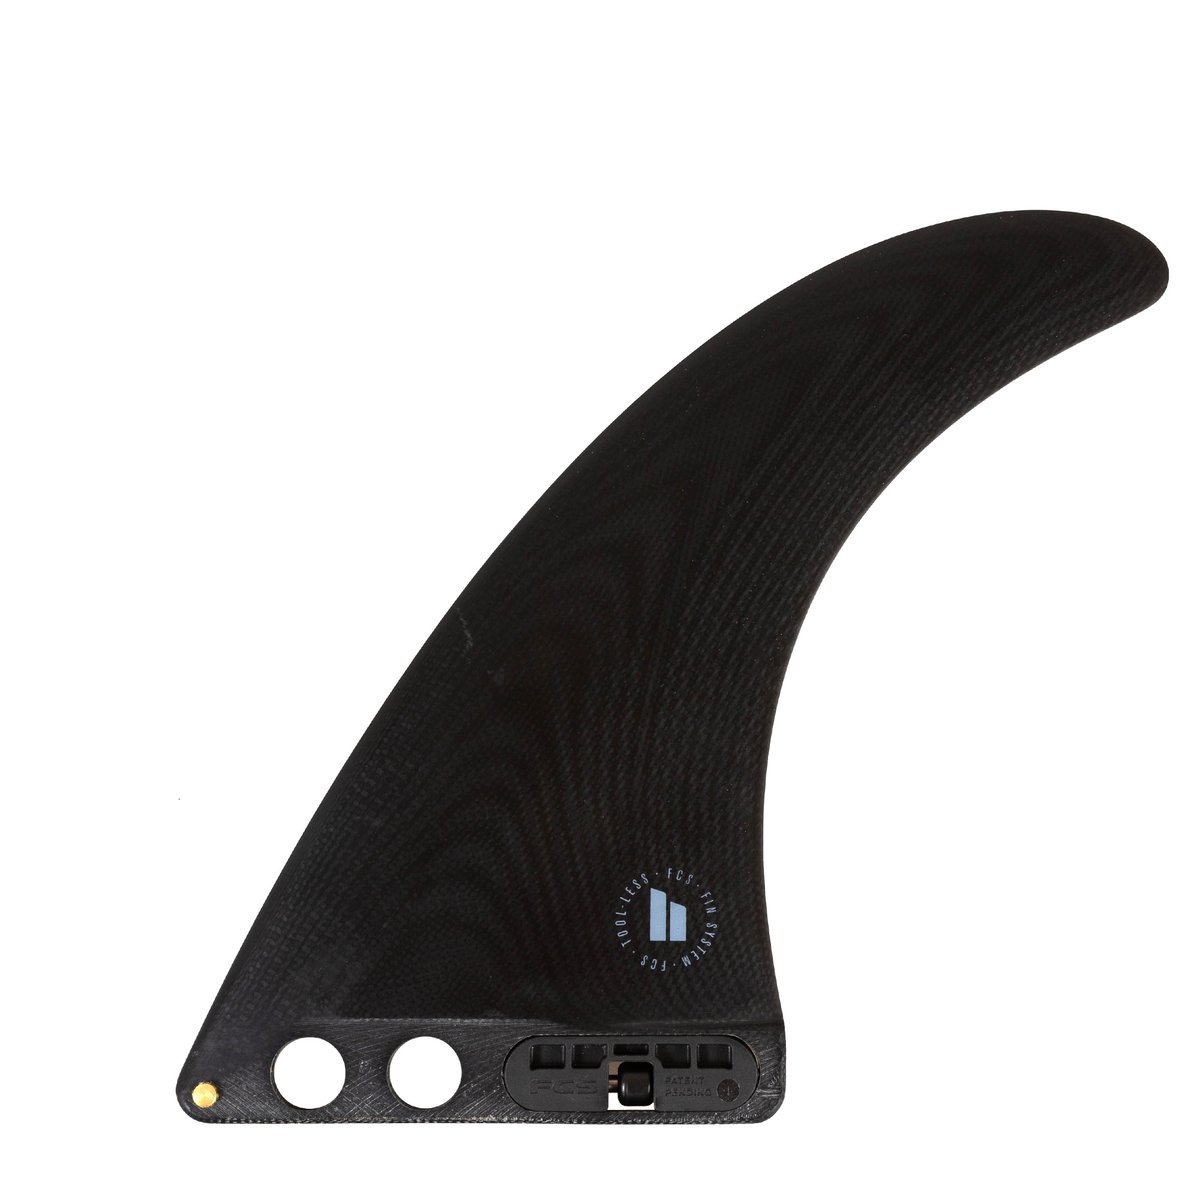 FCS2 エフシーエスツー ロングボード センターフィン 7.0" CONNECT PG LONGBOARD FIN コネクト シングルフィン Black / Clear 2カラー